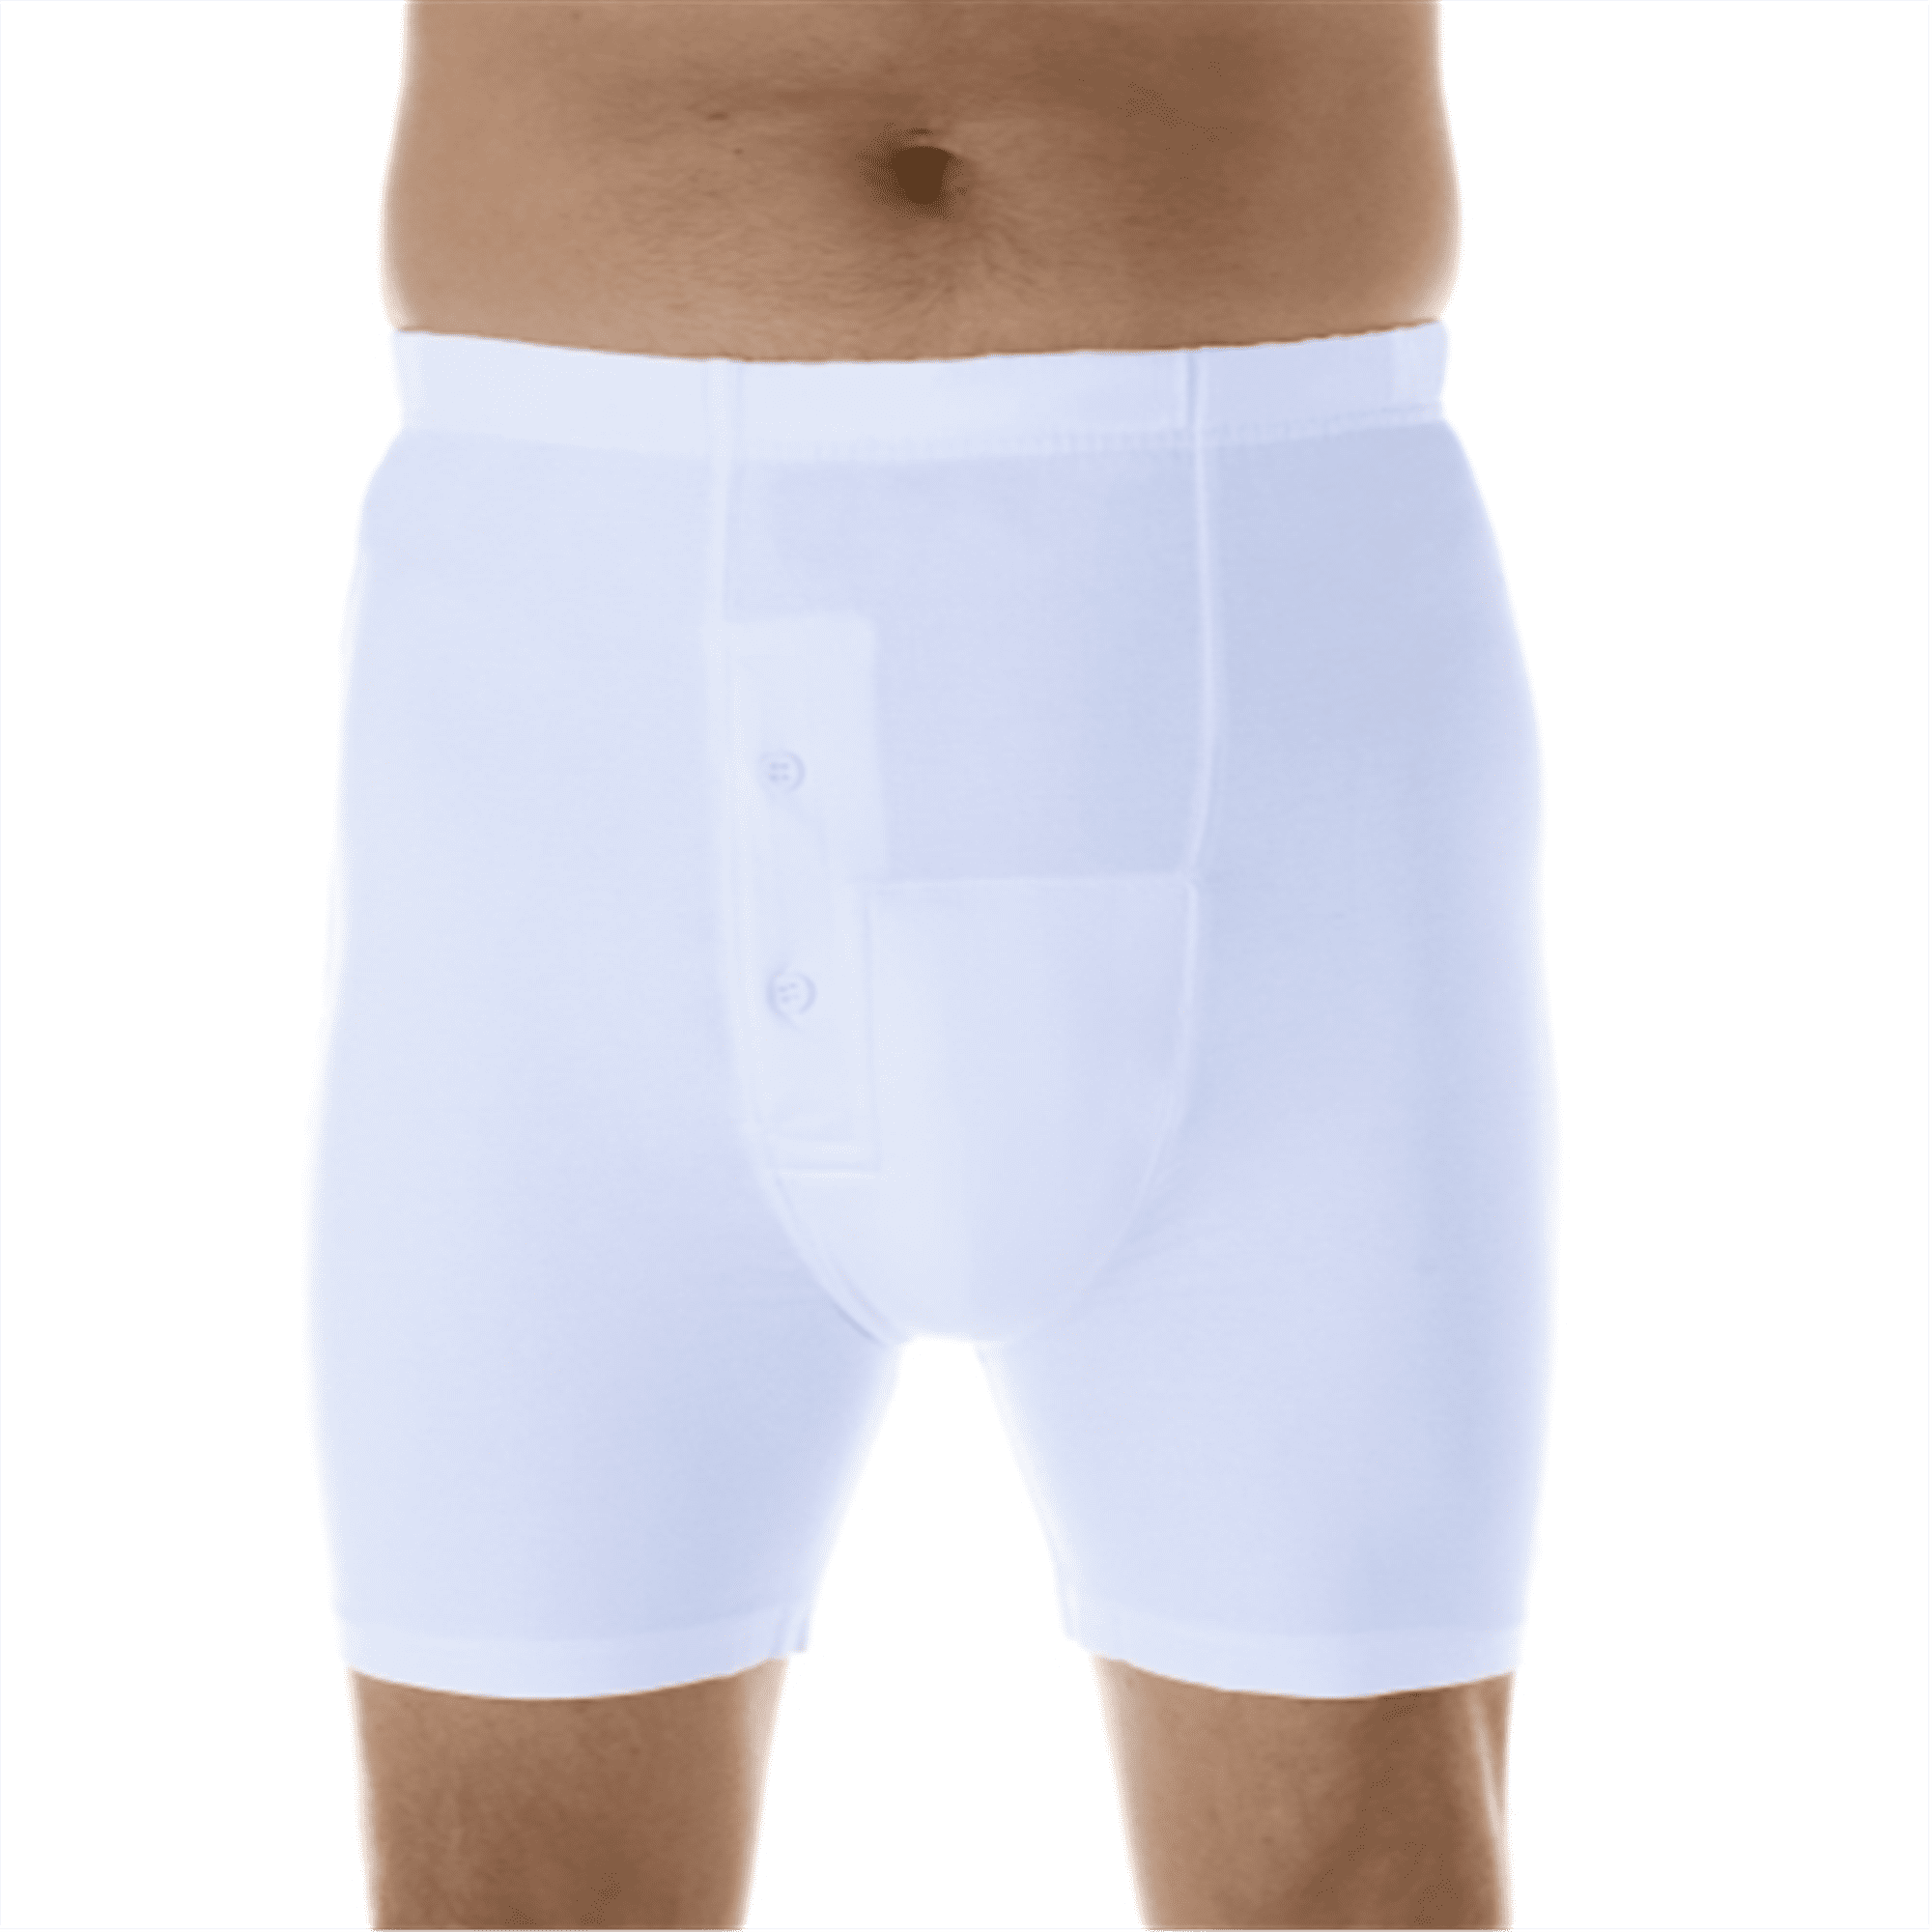 Male white stain on underwear What would